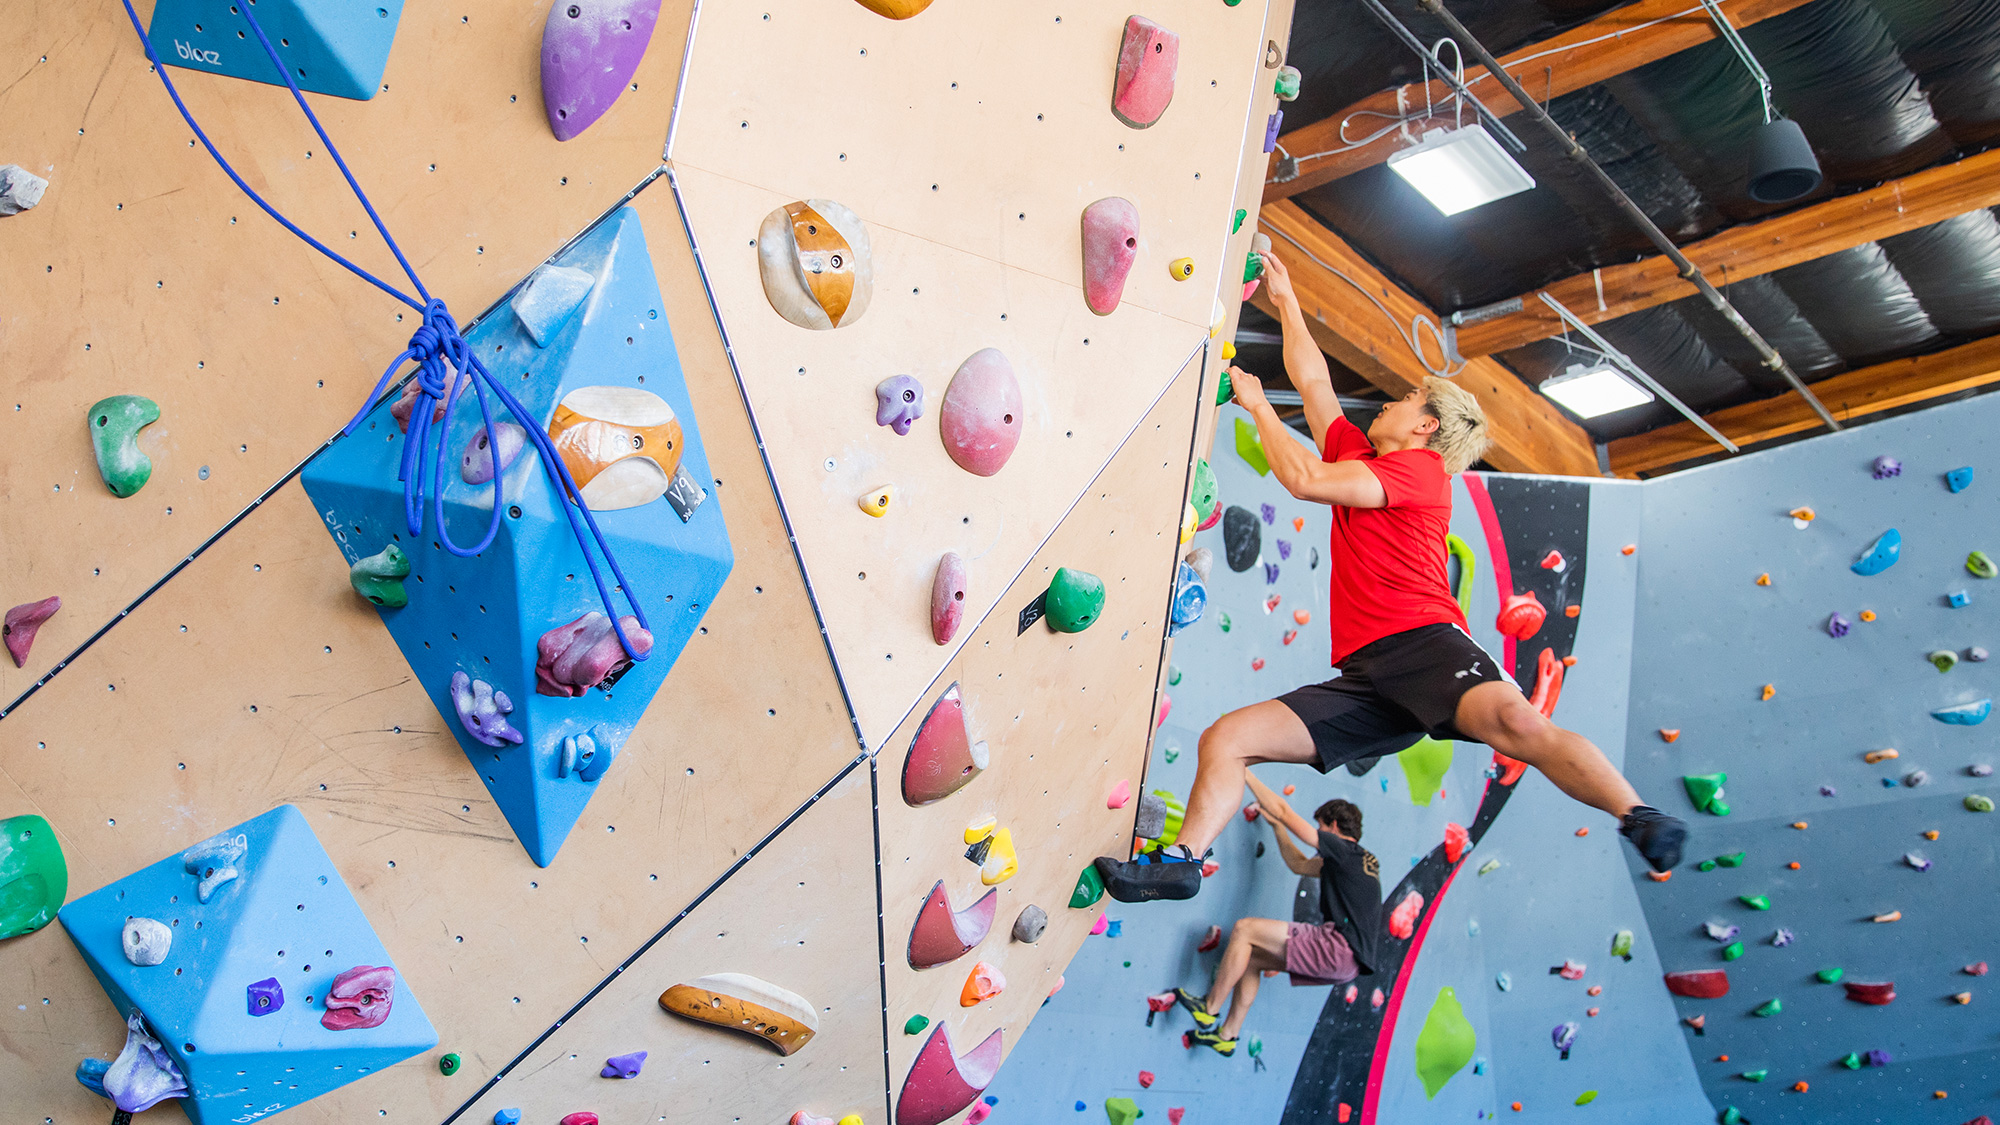 Students in CSUMB’s Monterey Bay Adventure Sports class learn to rock climb at Sanctuary Climbing and Fitness in Seaside. Photo by Brent Dundore-Arias